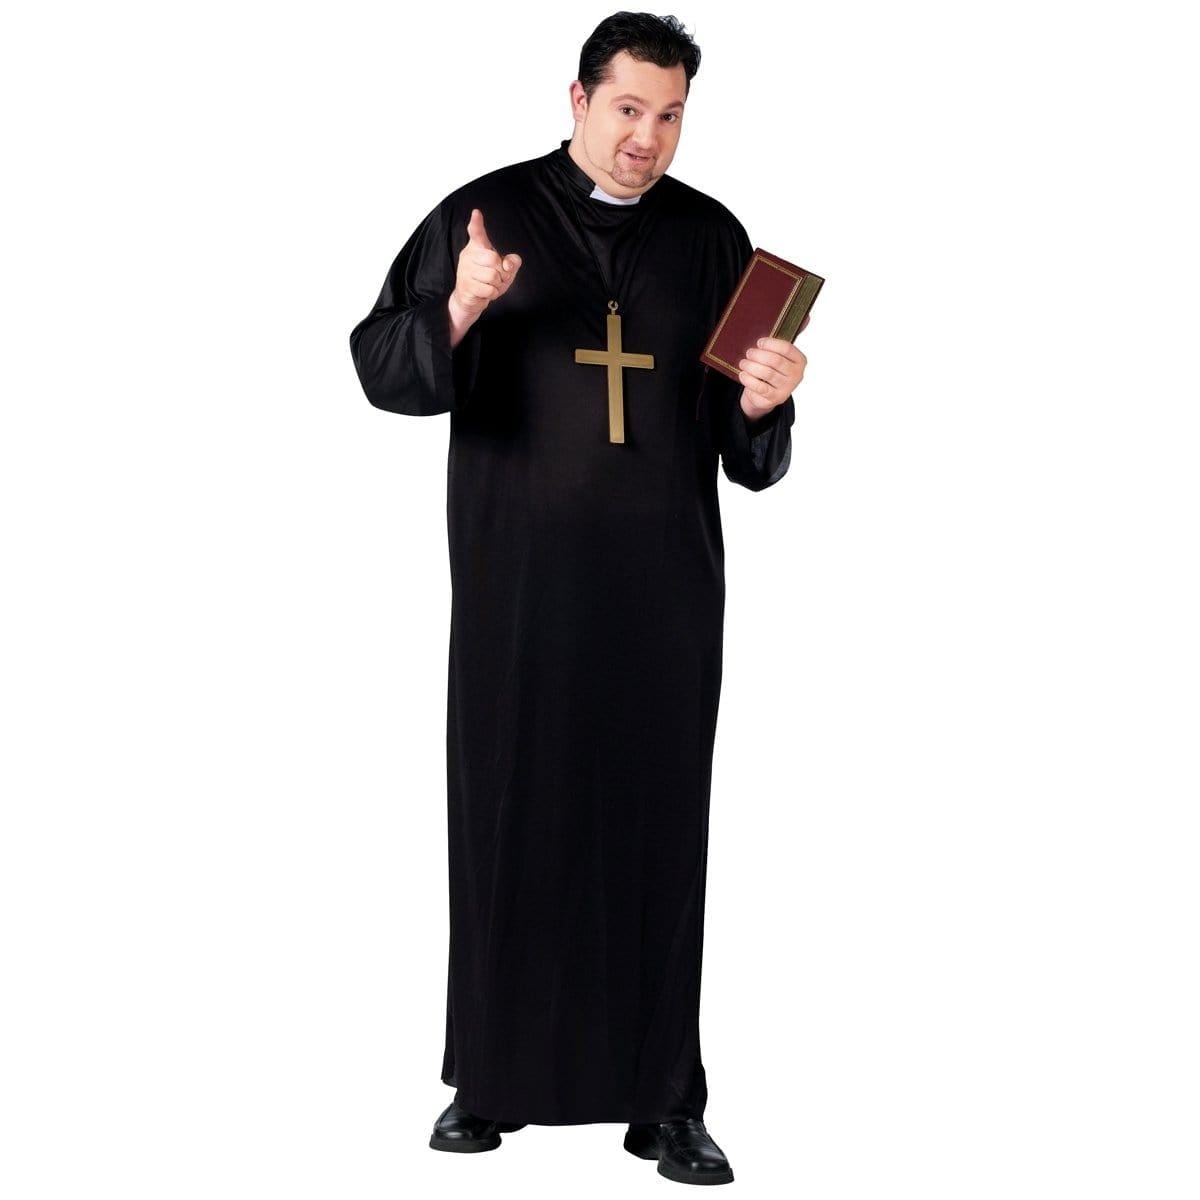 Buy Costumes Priest Costume for Plus Size Adults sold at Party Expert